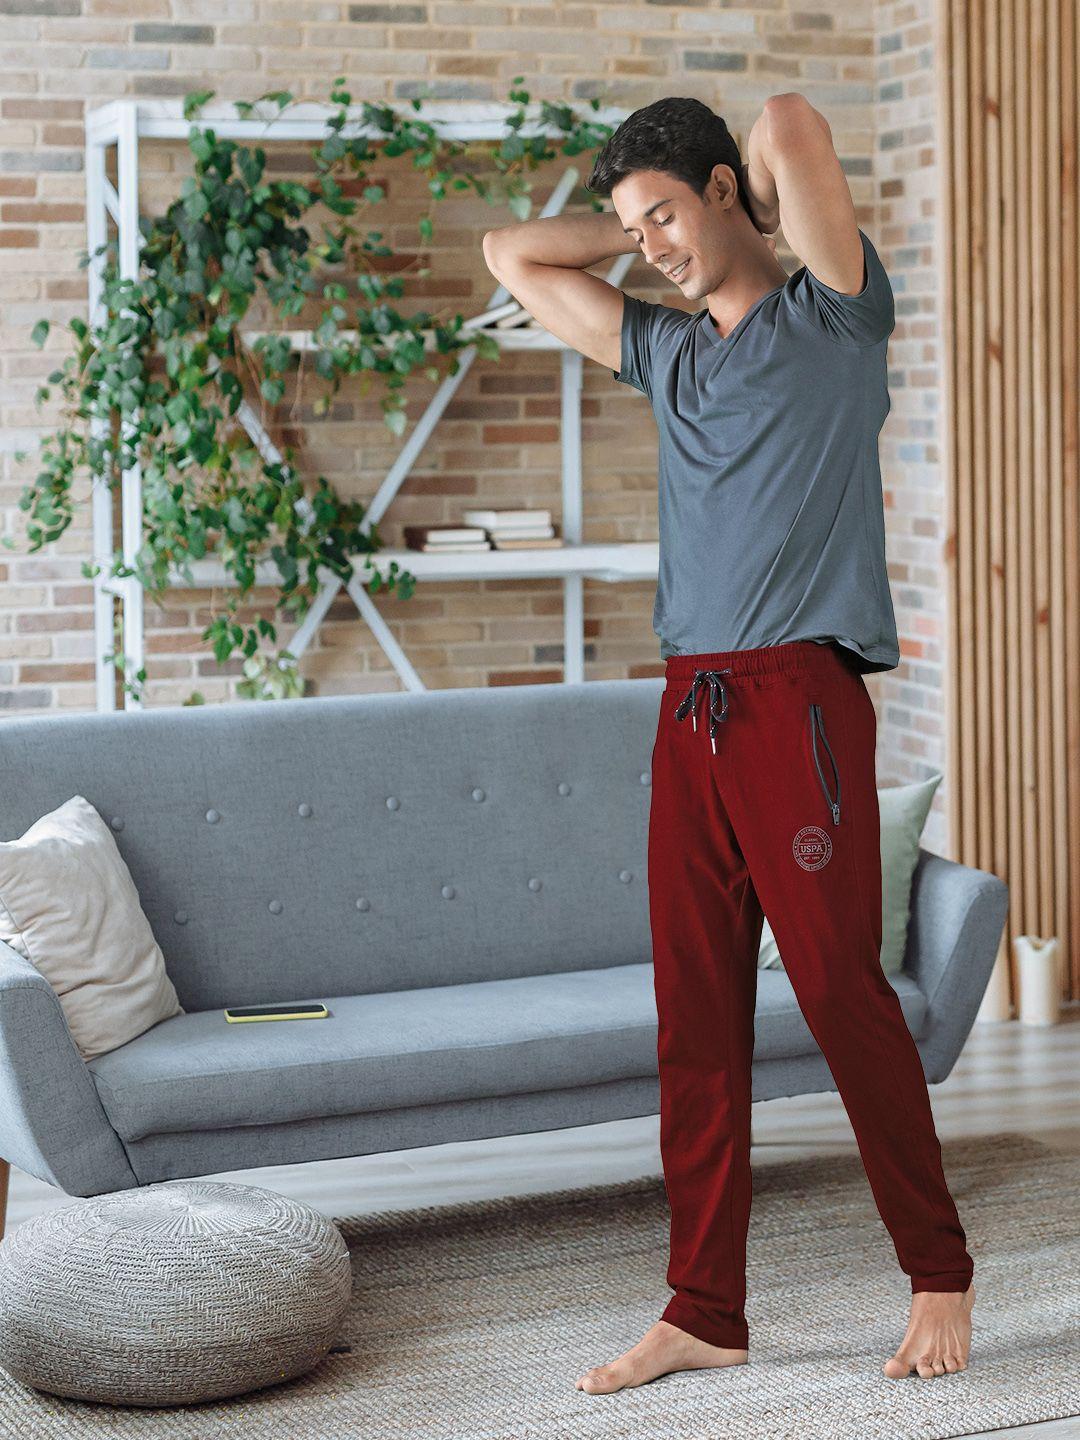 u.s. polo assn. men red solid lounge pants